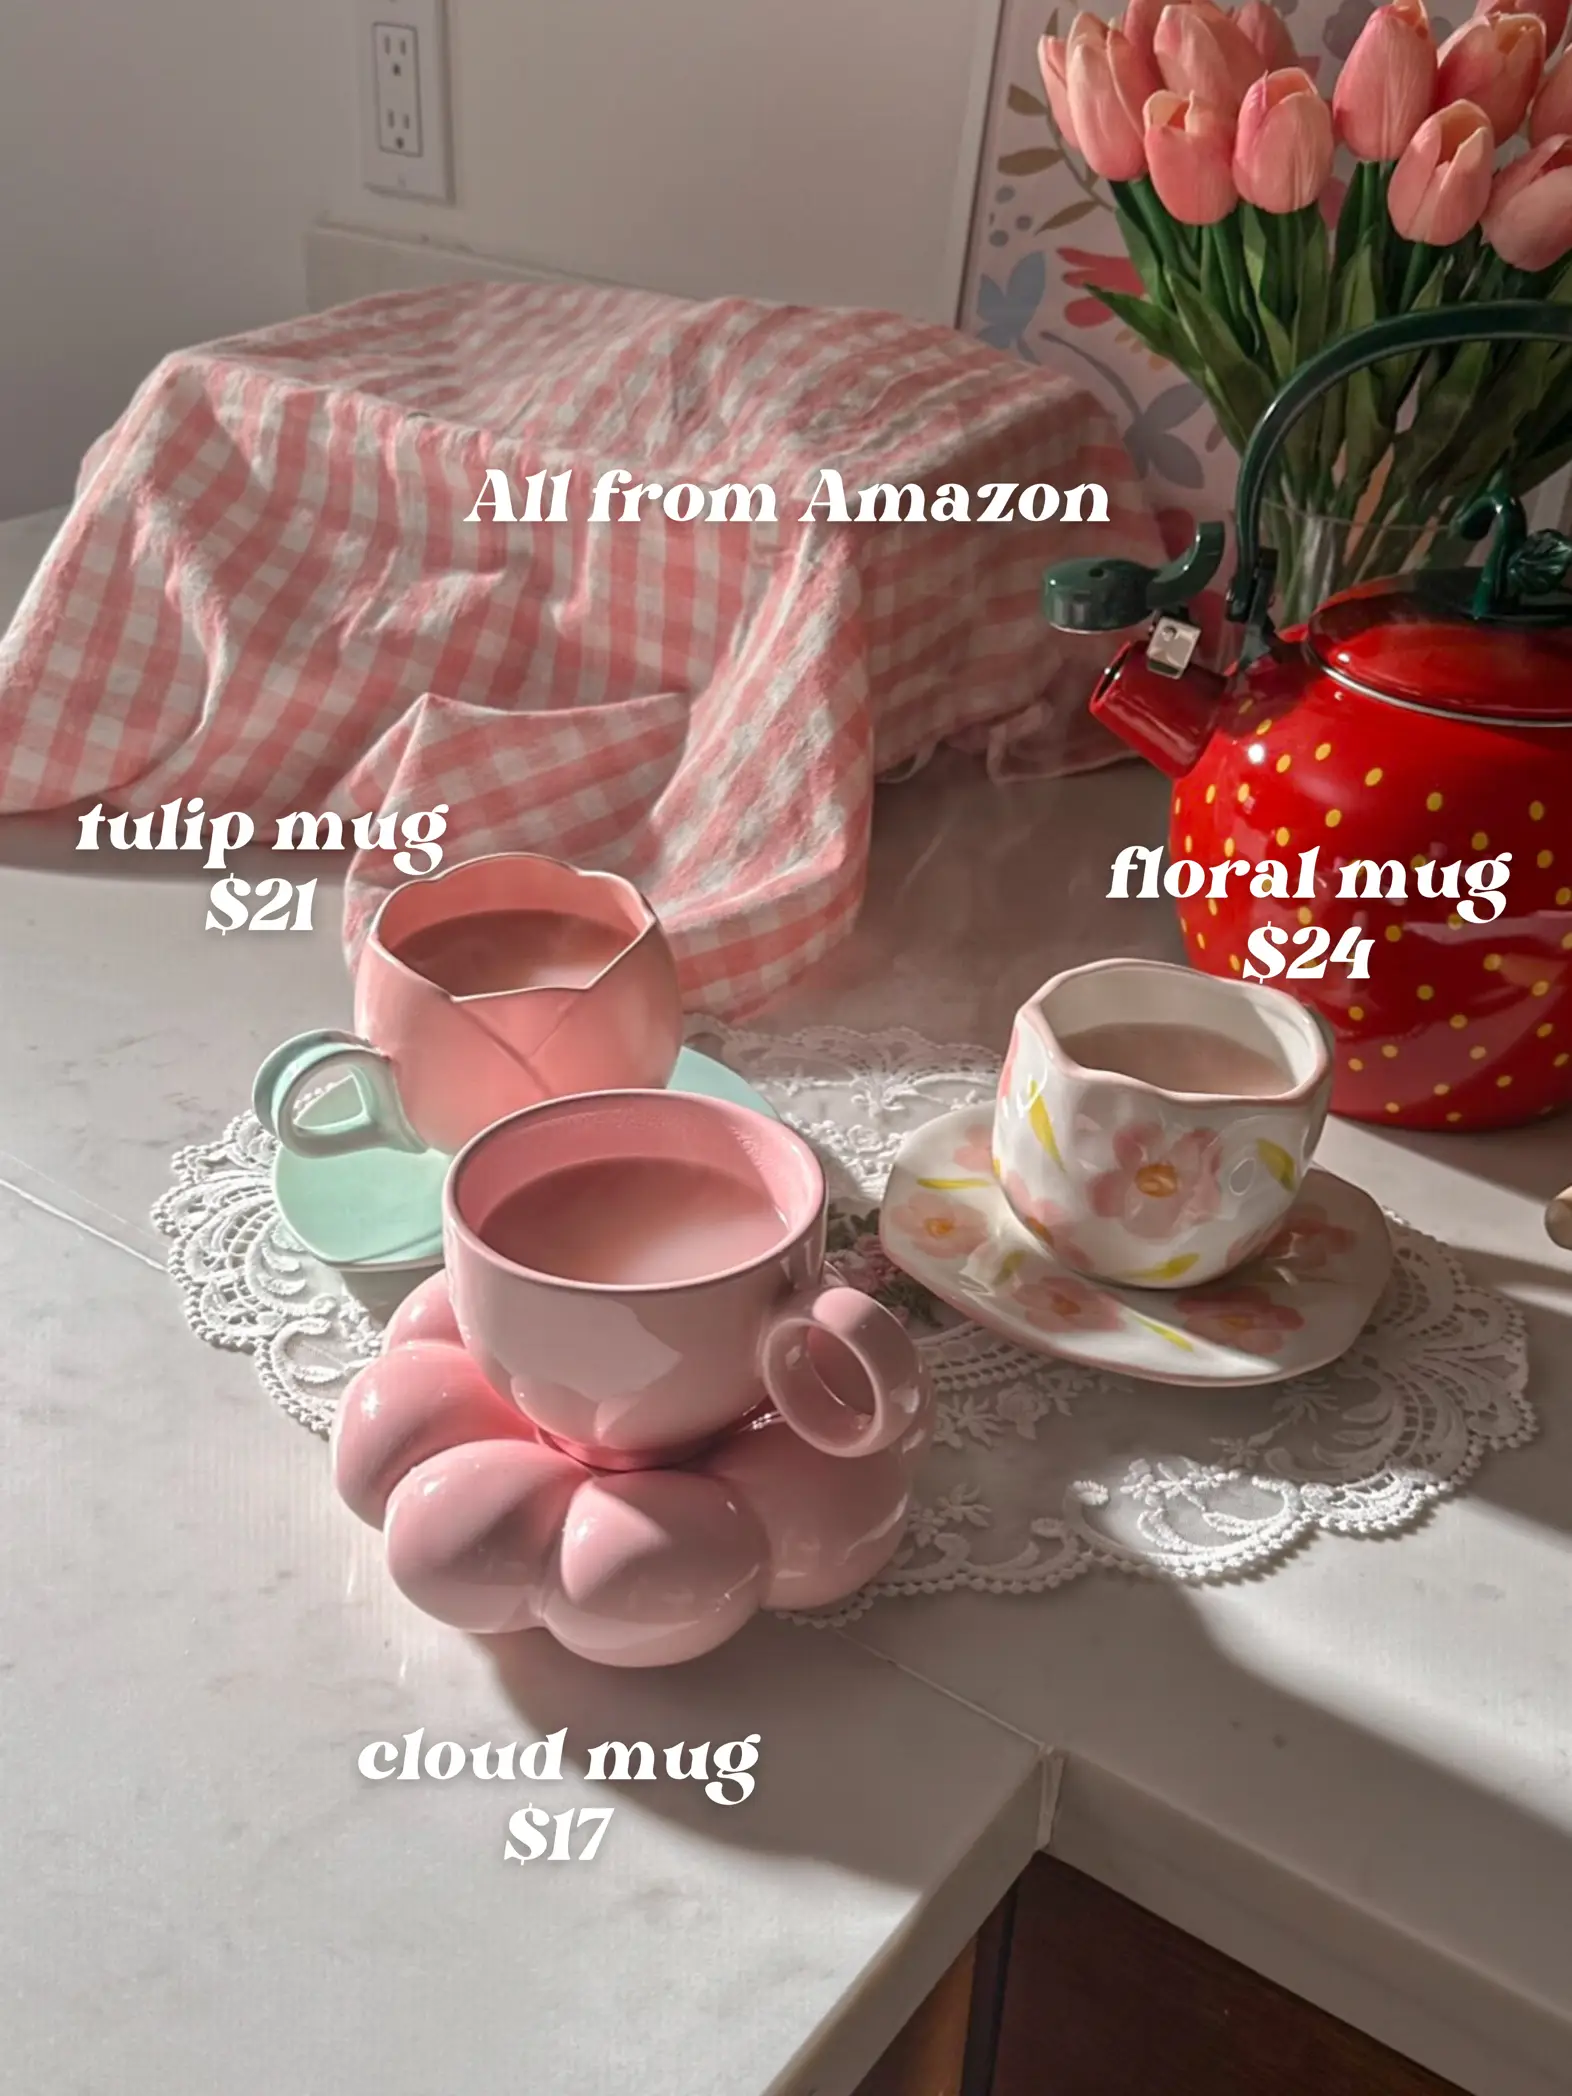 Cute shaped cups 🌸, Gallery posted by Cristina Viseu